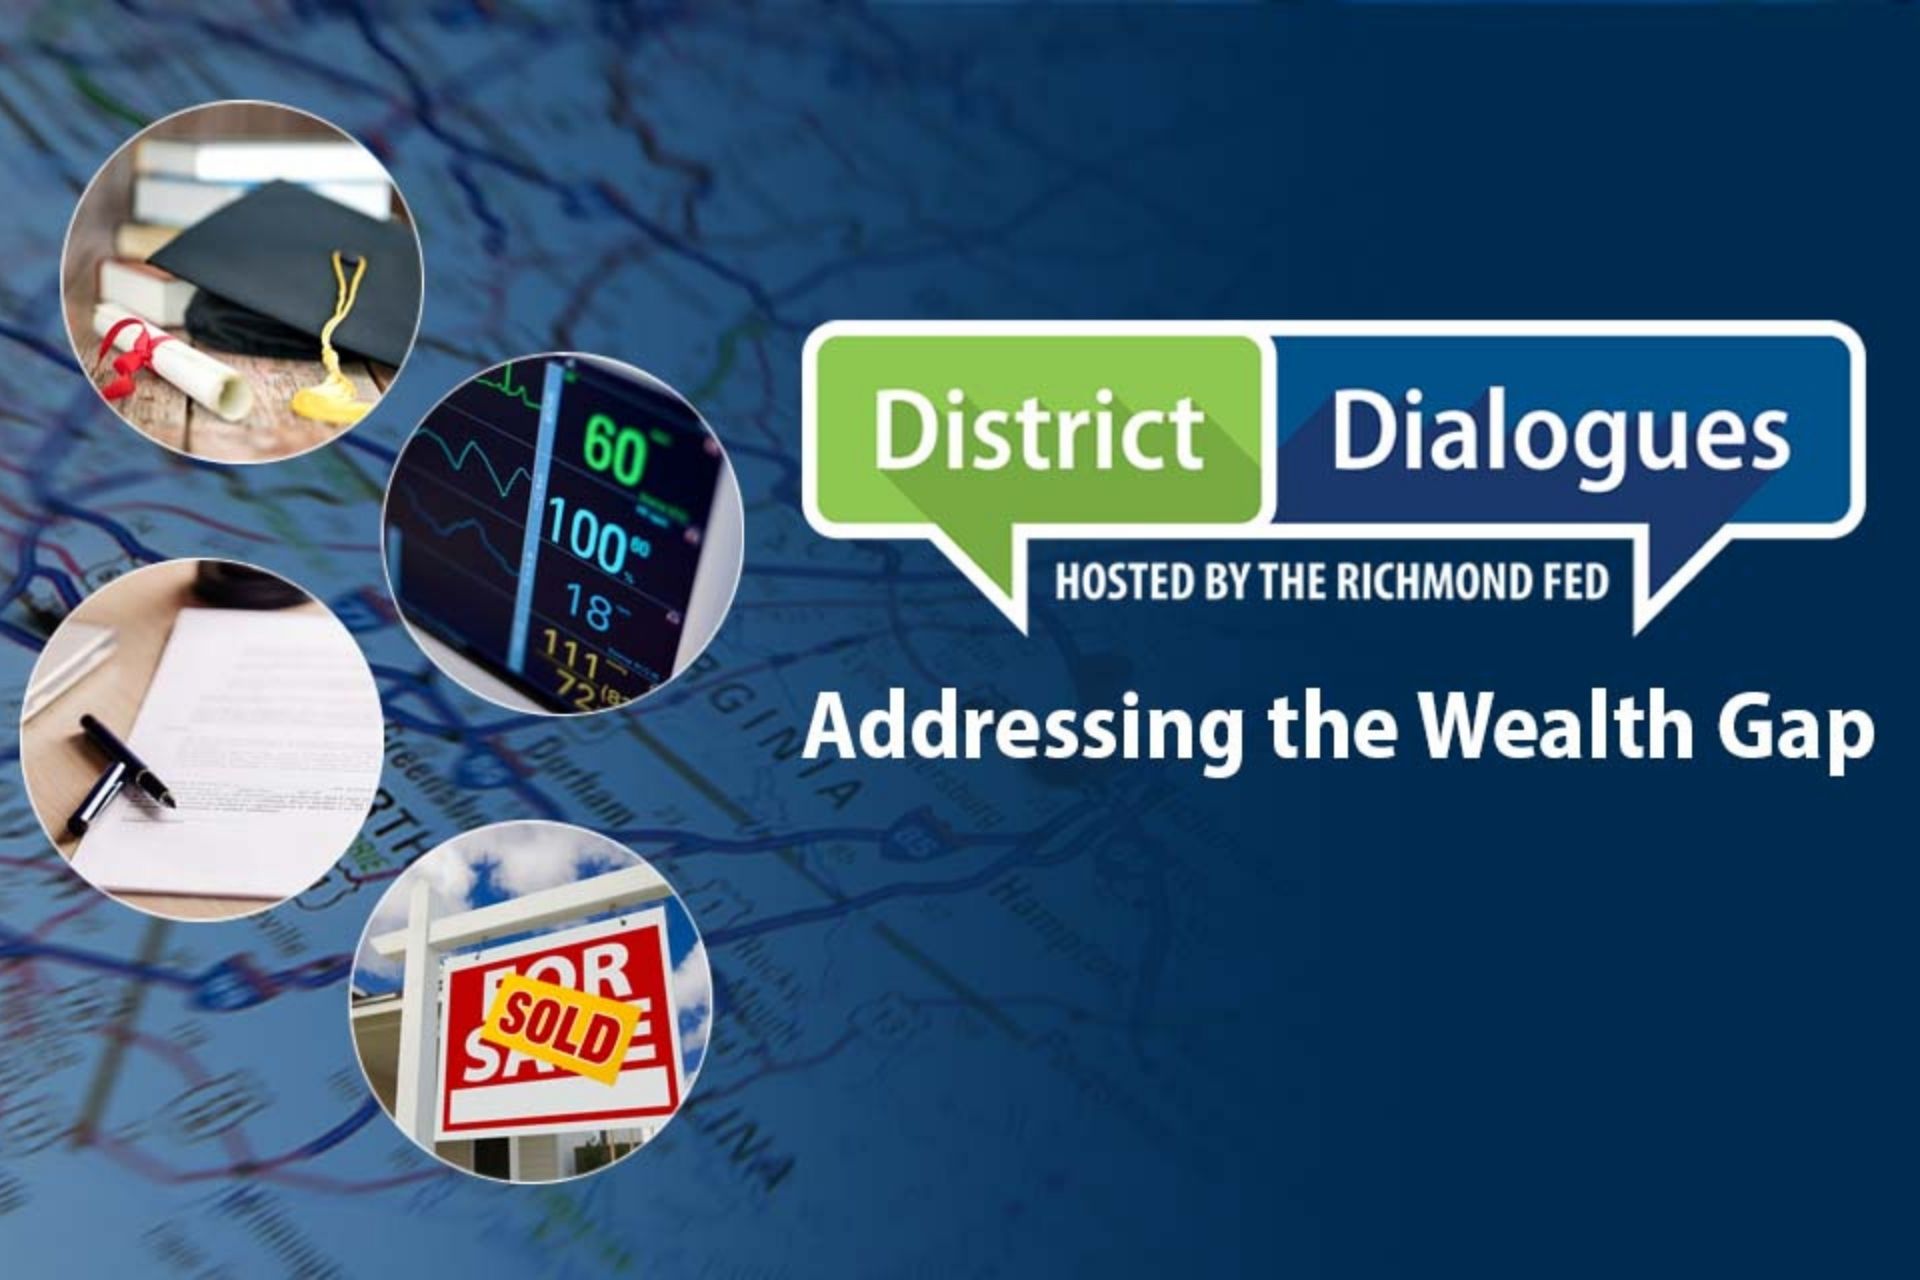 District Dialogues: Addressing the Wealth Gap